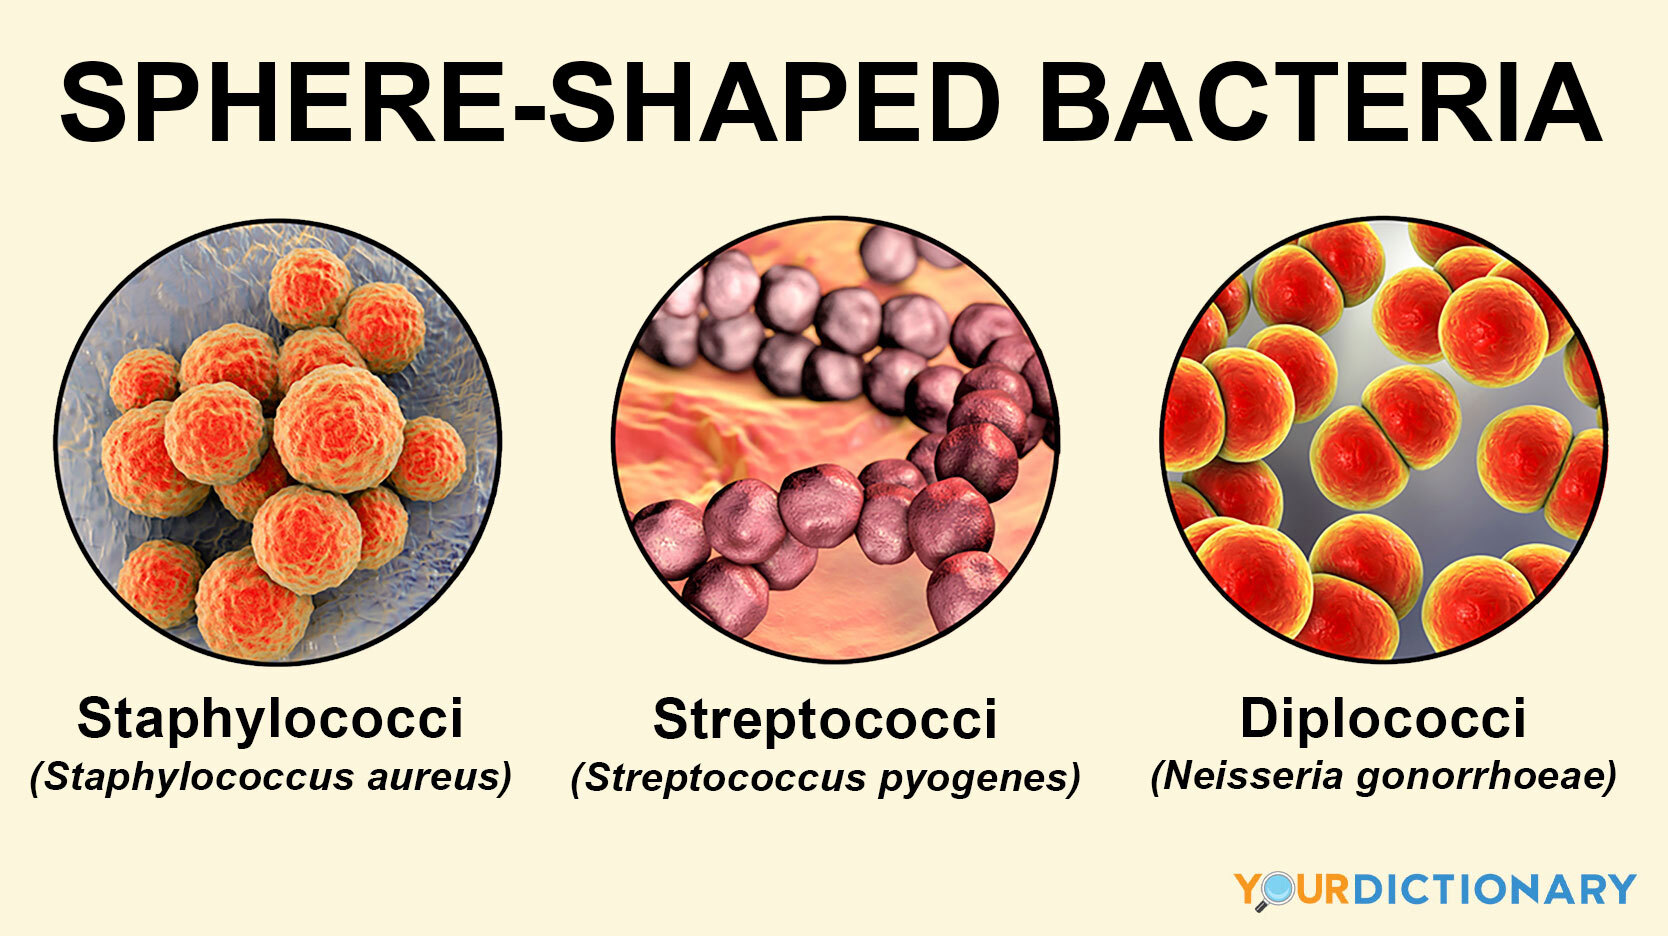 examples of bacteria that are sphere-shaped